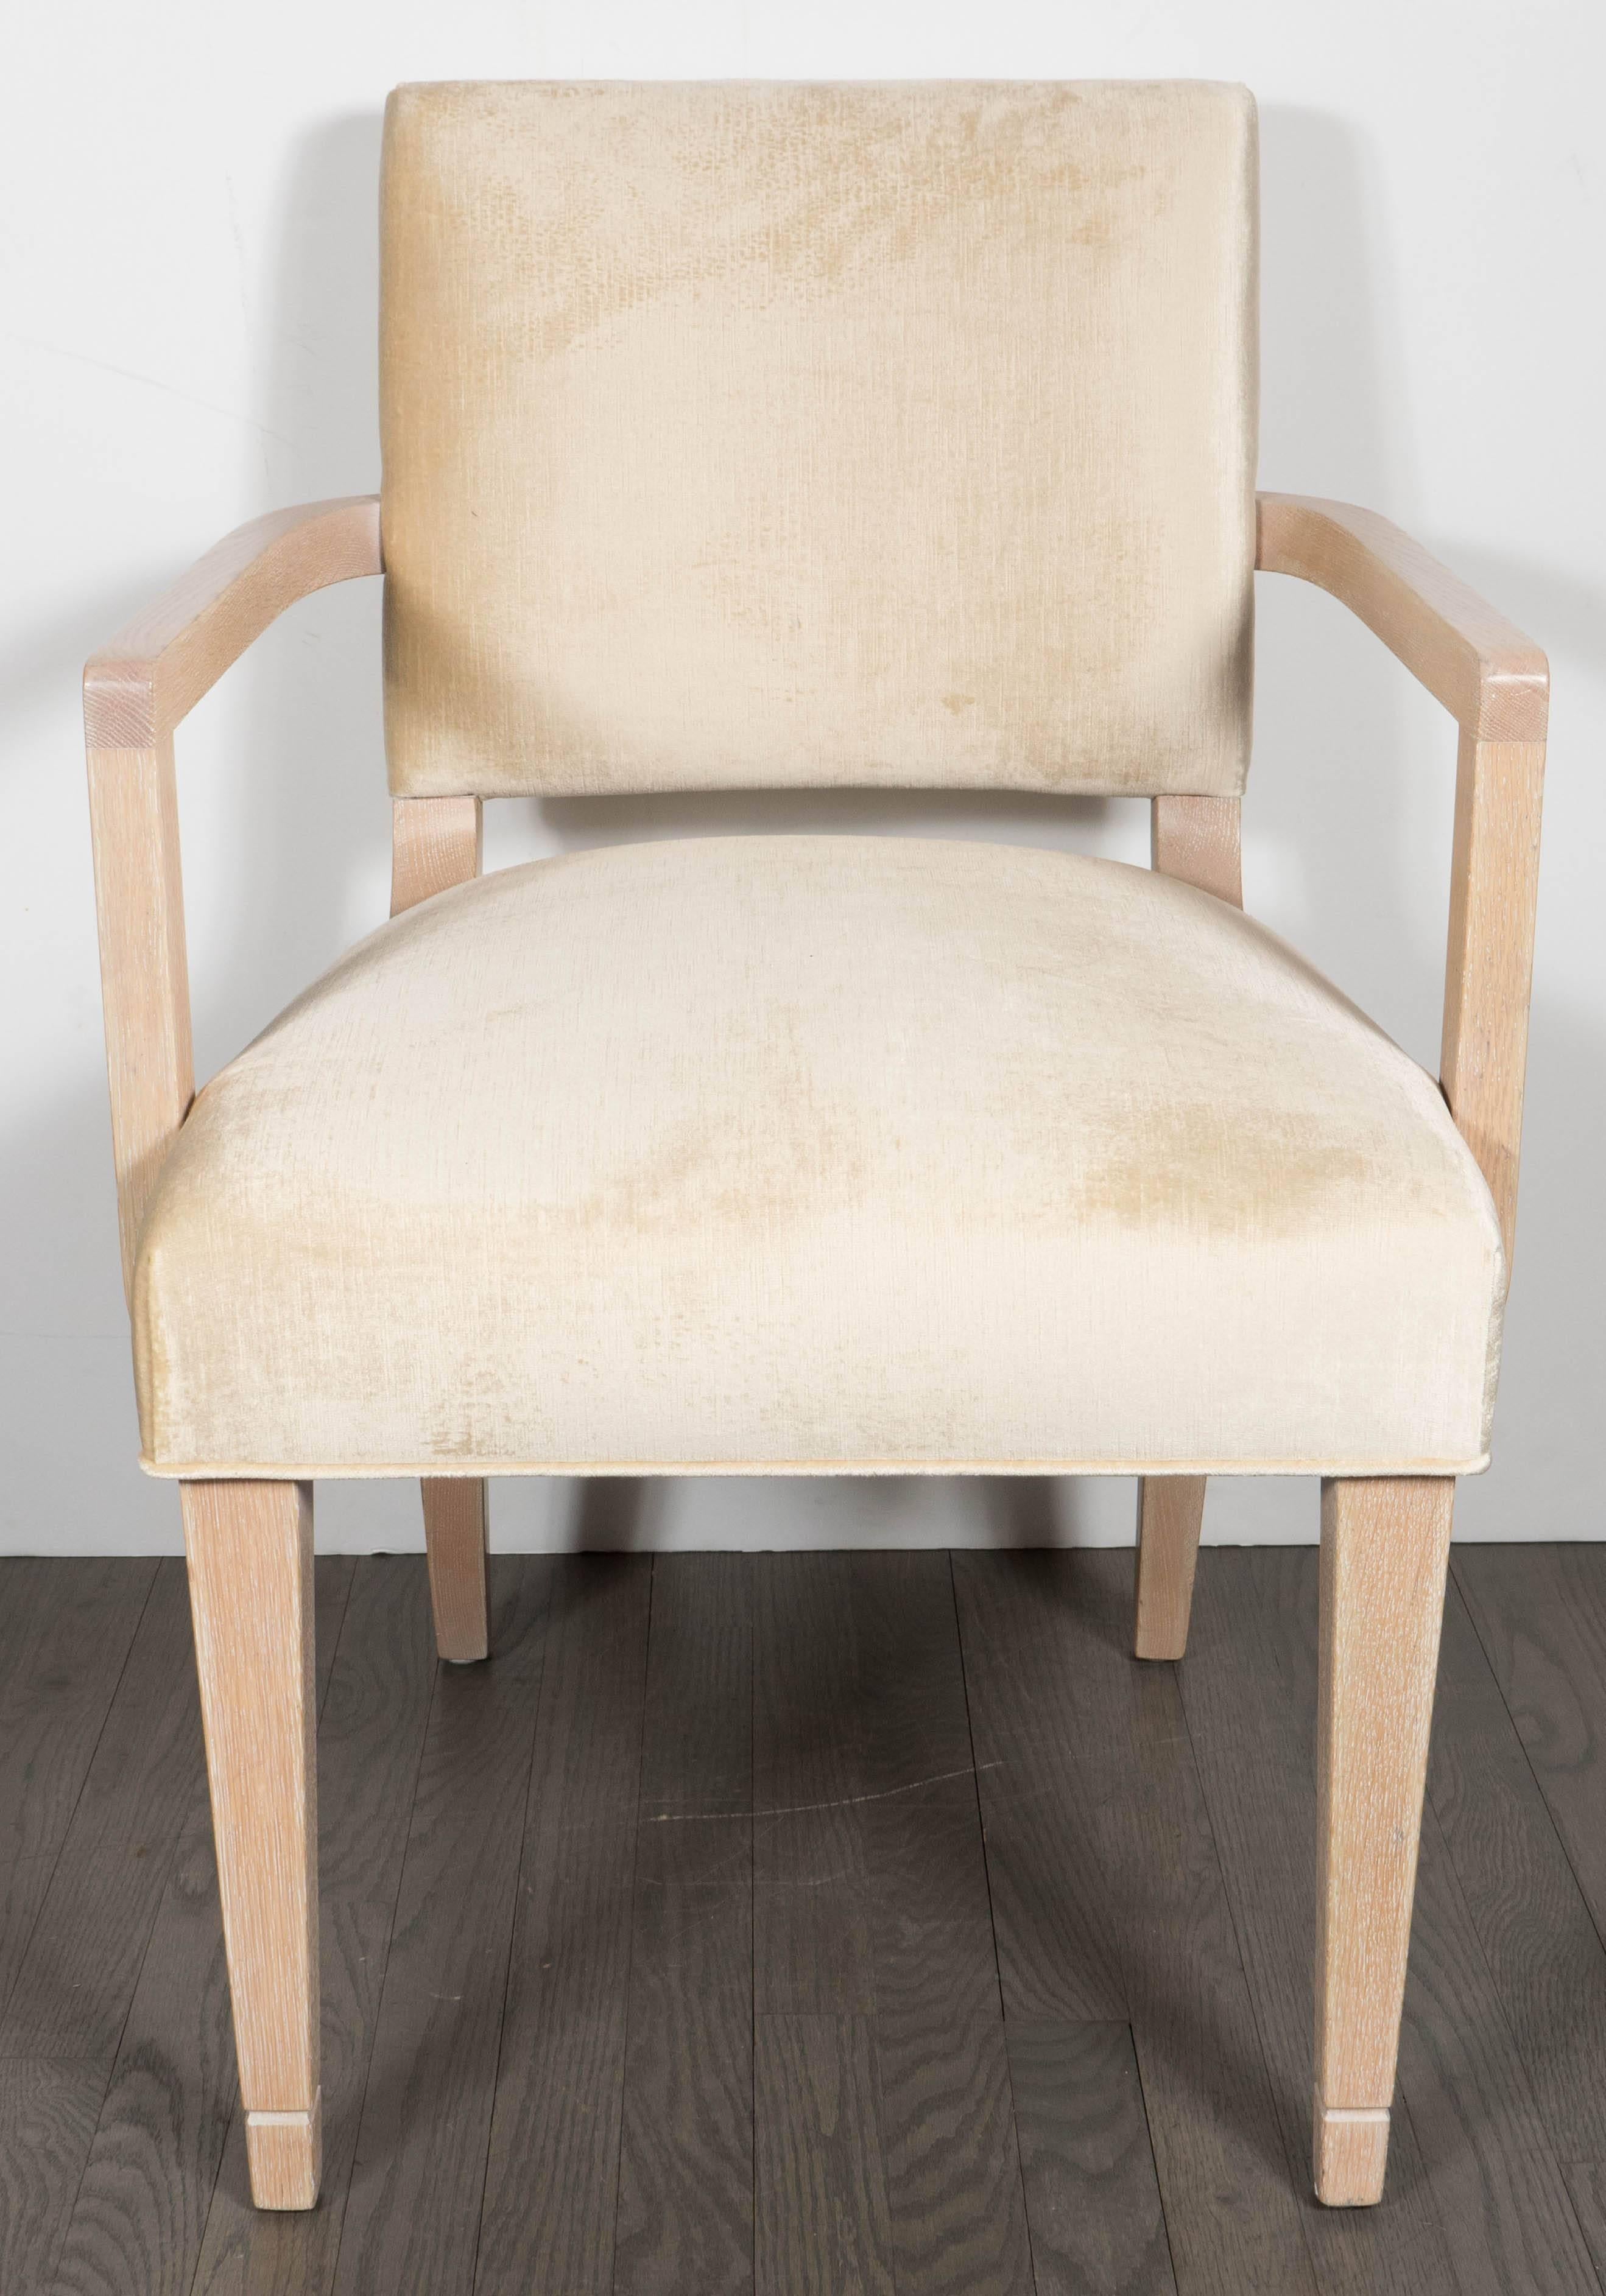 A gorgeous and very rare set of eight dining chairs in cerused white oak by Dorothy Draper for Schmieg & Kotzian. New pearl oyster velvet upholstery covers the seats and backs. Slightly splayed rear legs and minimally detailed front legs support